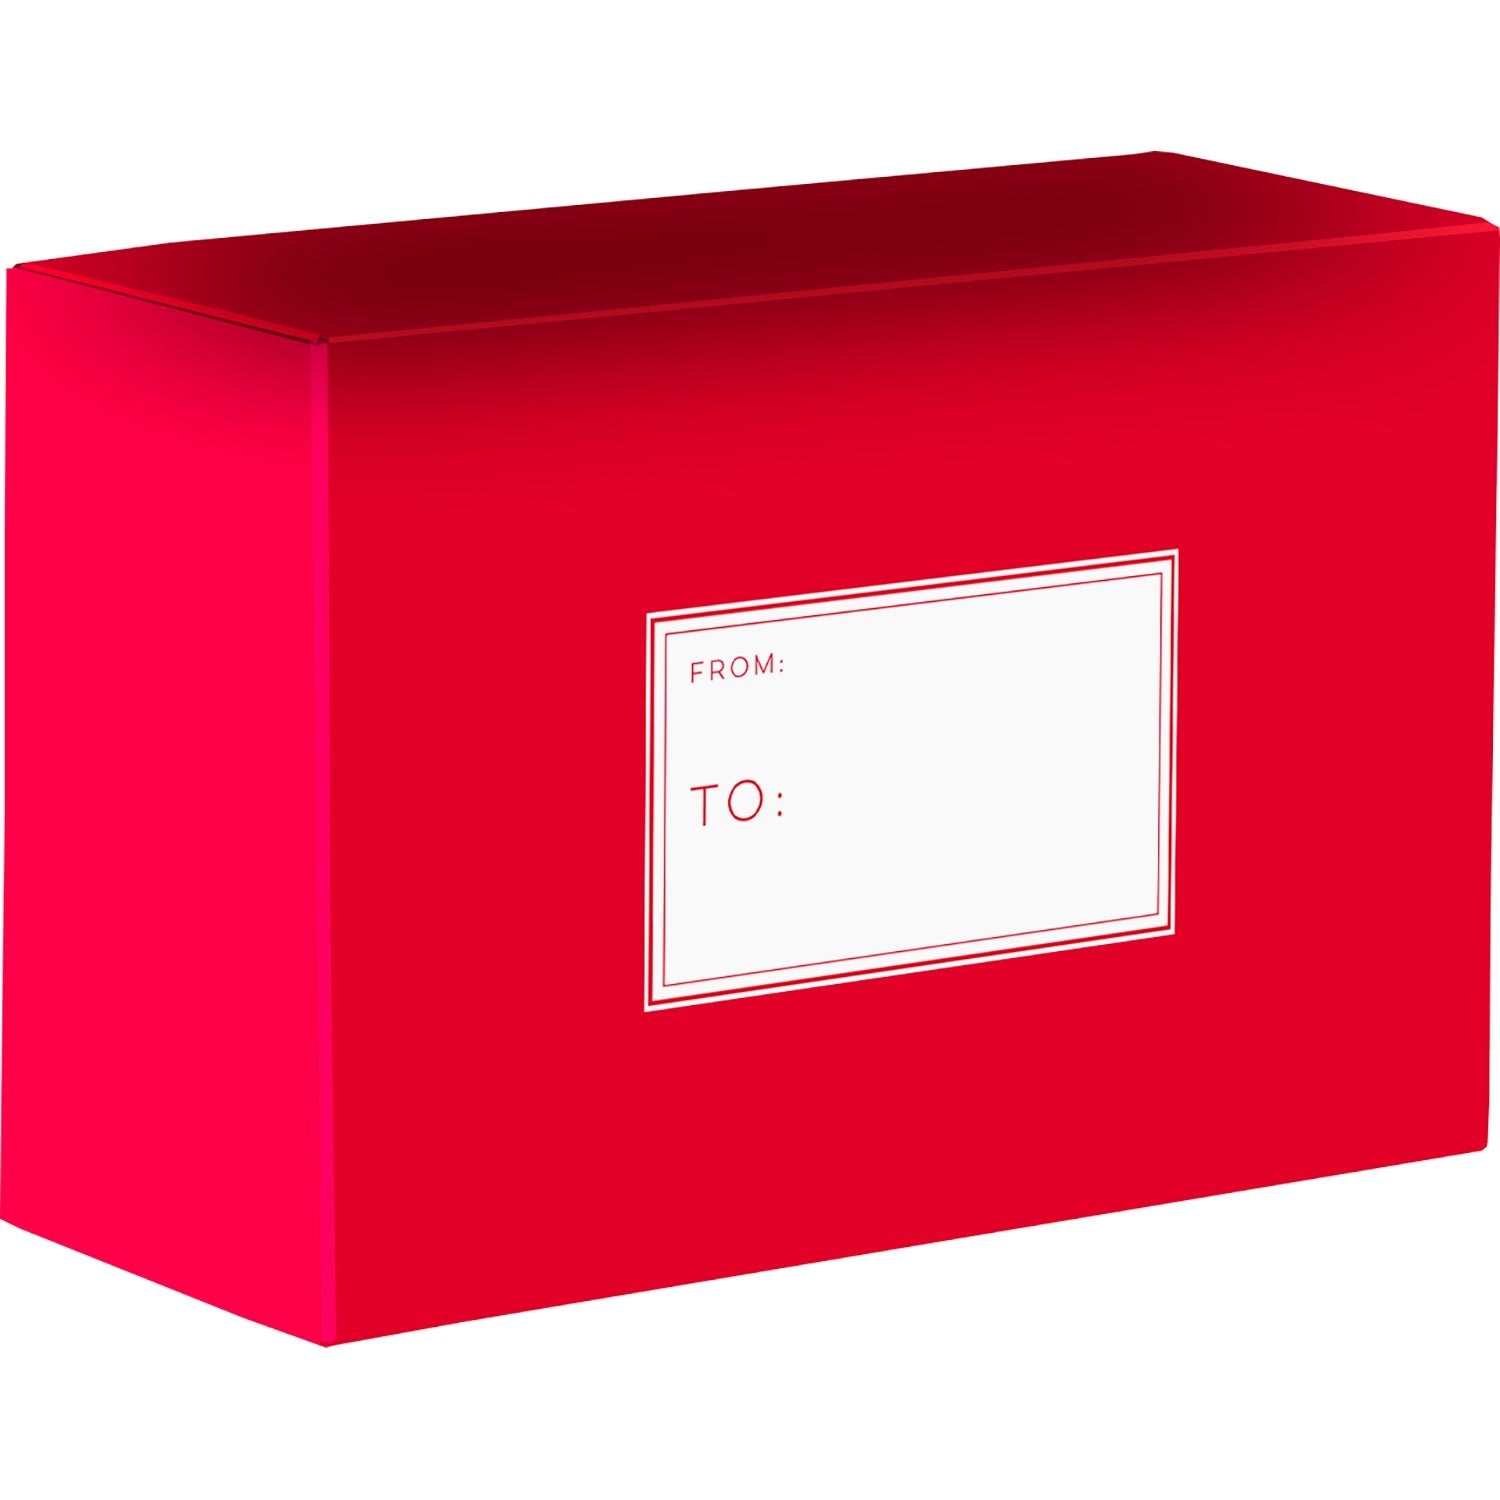 Red Medium Printed Gift Mailing Boxes